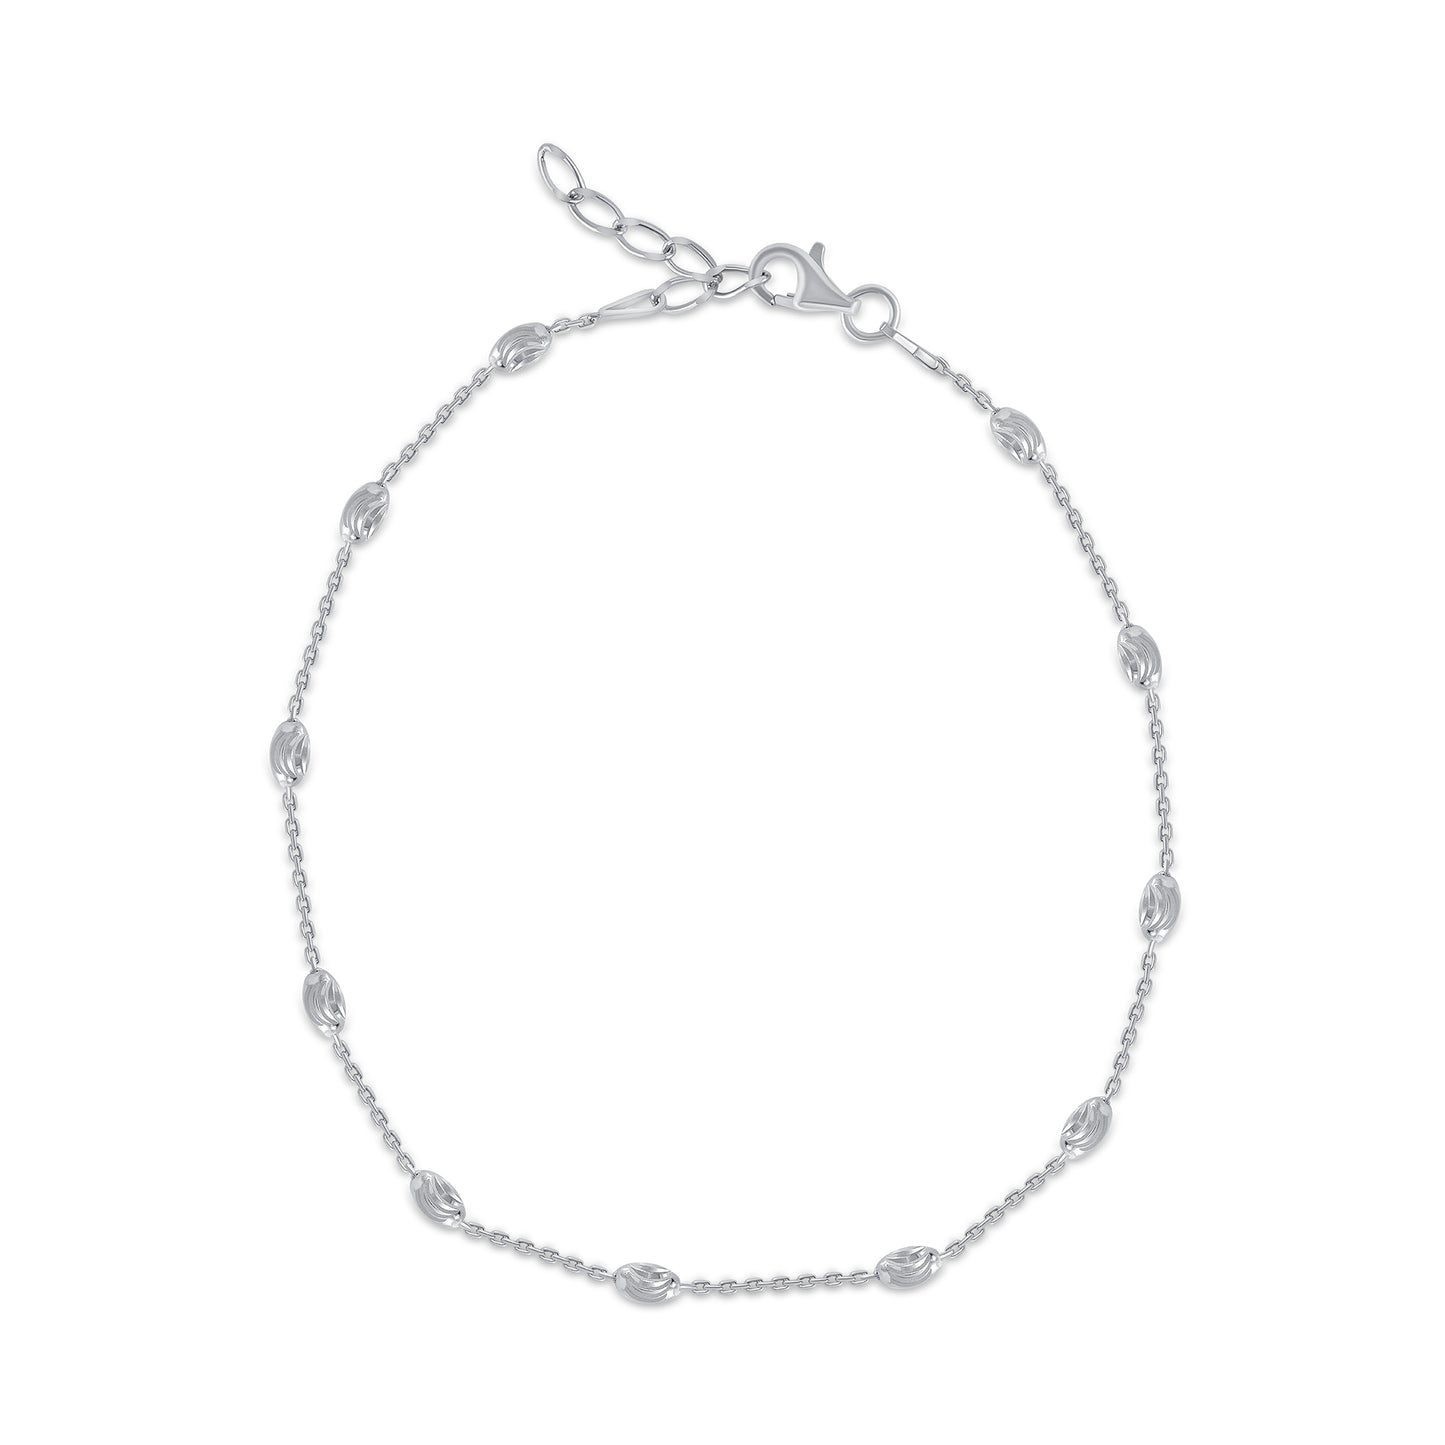 EXTOV3R-9. Silver 925 Rhodium Plated 3mm Oval Anklet